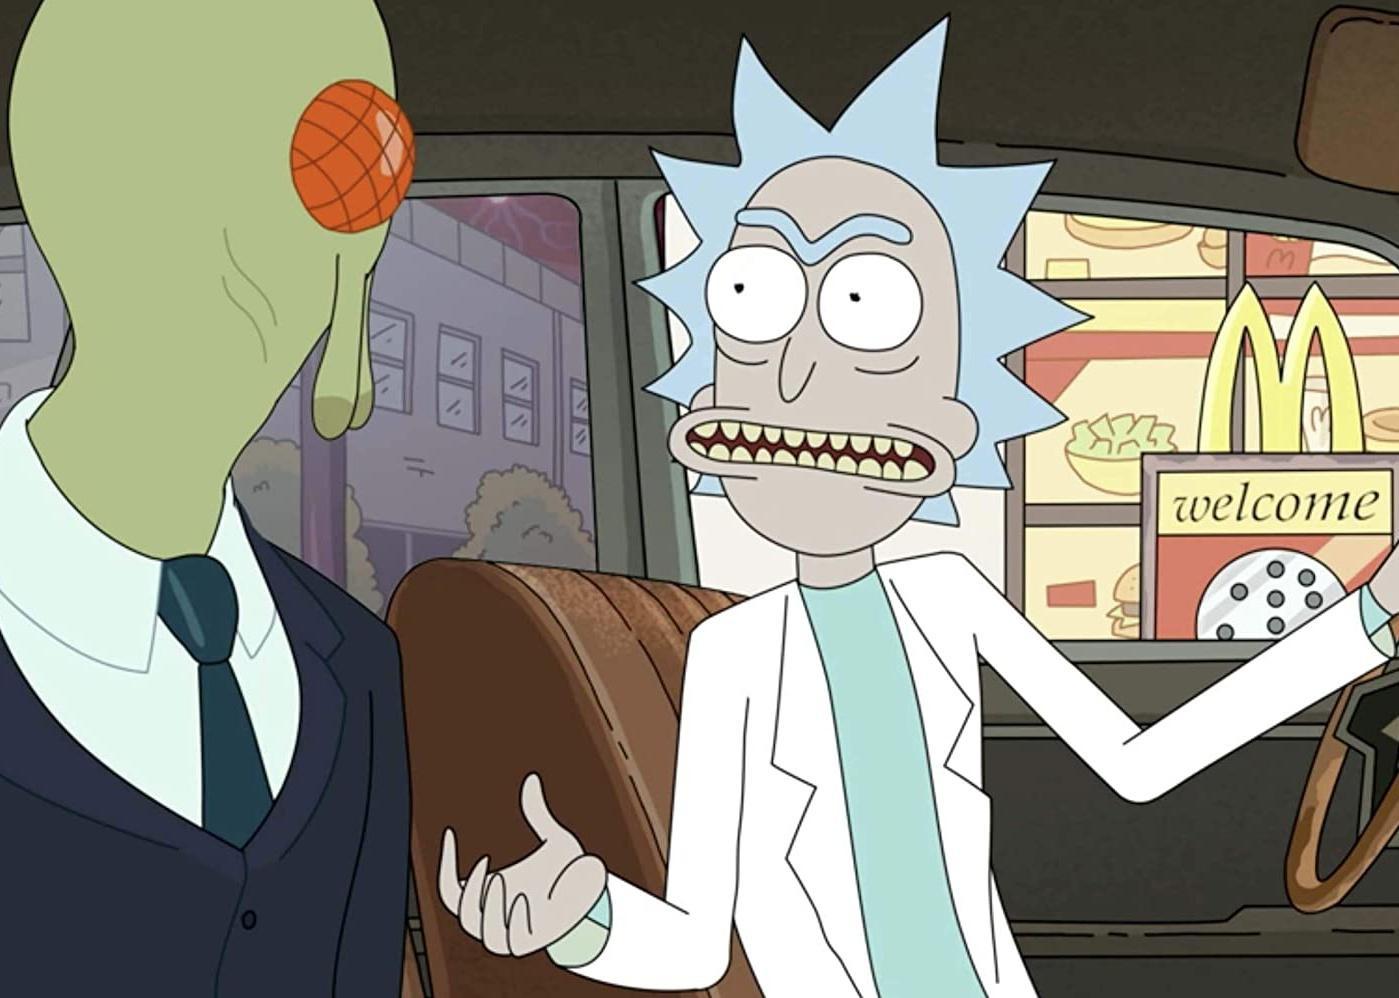 A cartoon of a man with spikey gray hair and an alien in a suit getting fast food at a drive-thru.